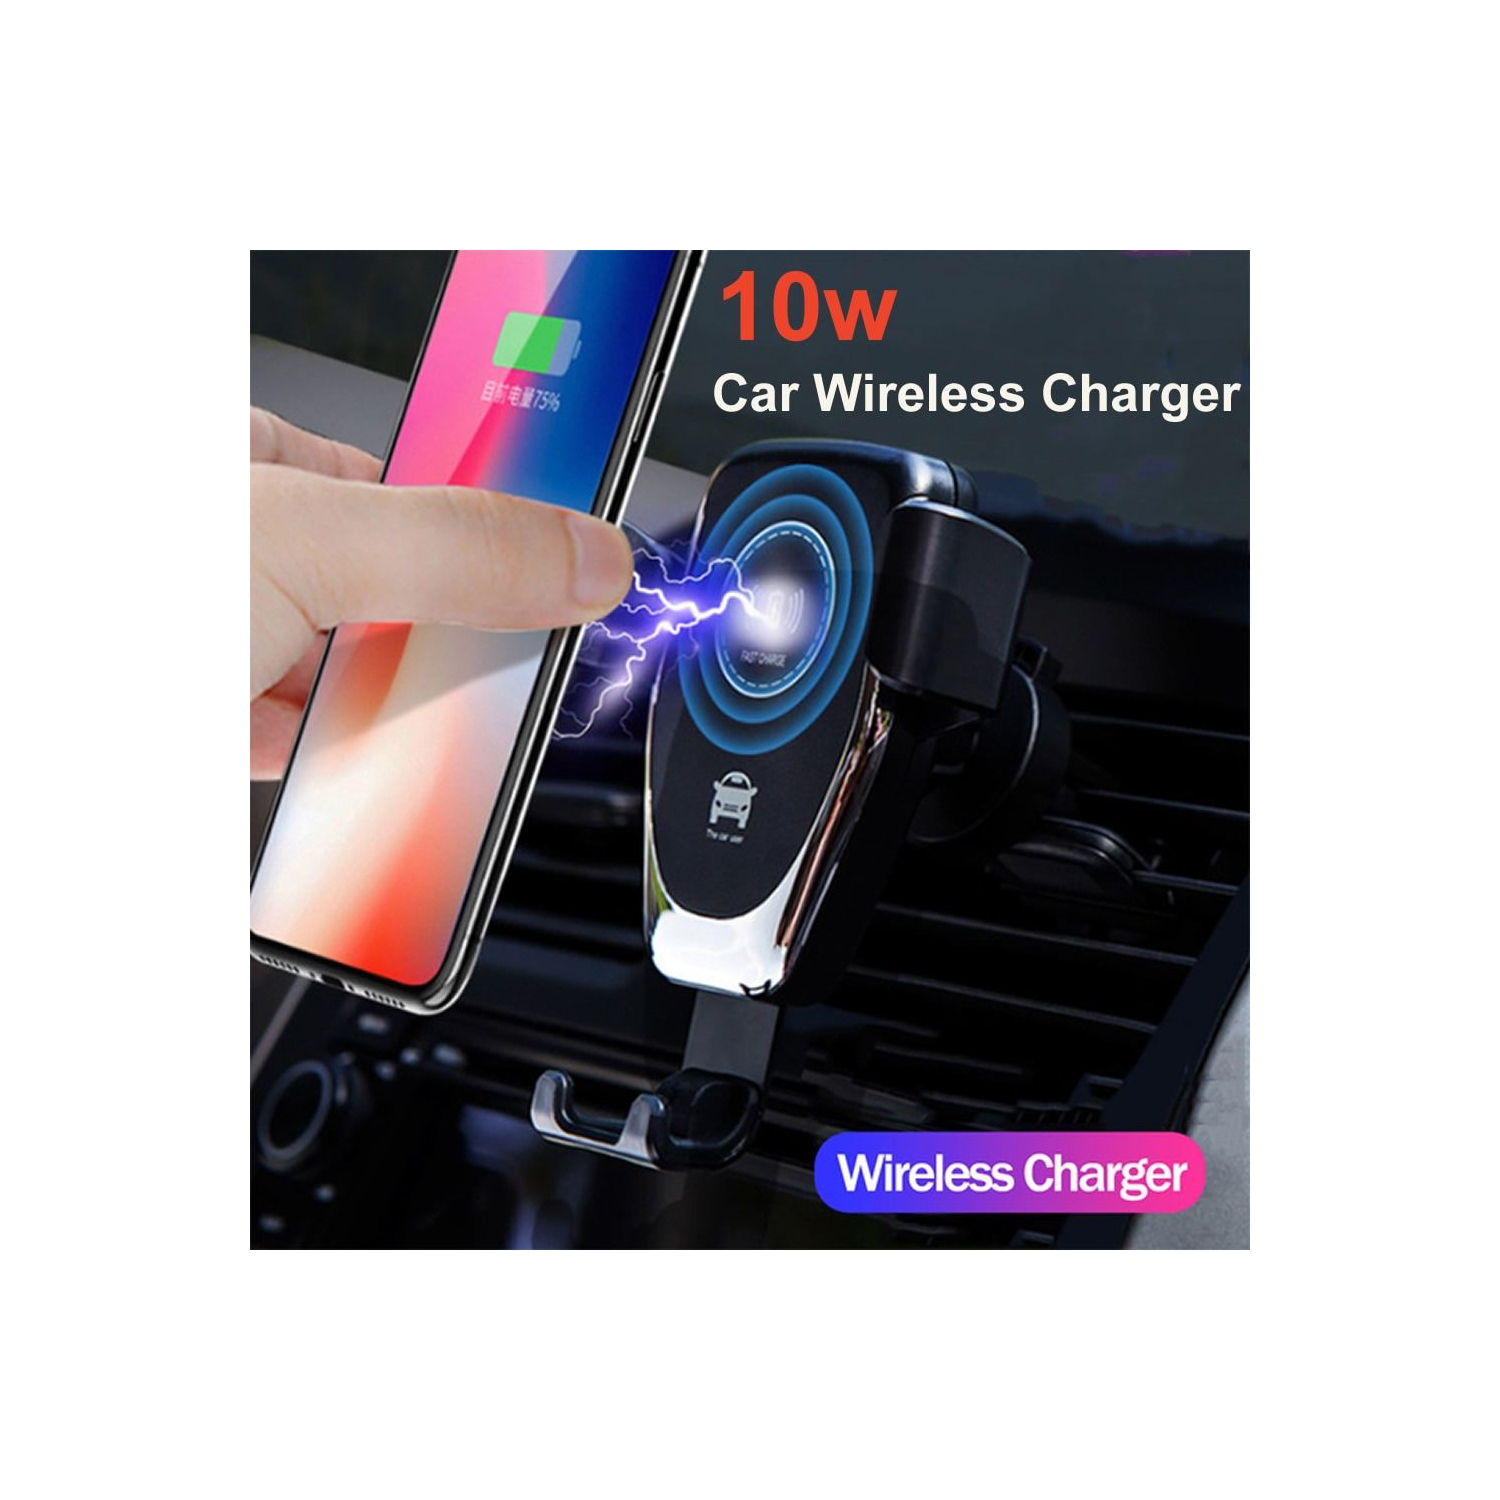 10W Car Wireless Fast Charging Stand Holder For IPhone 11 Pro Max Xs 8 Car Wireless Quick Charger Bracket For Samsung S9 S10 S20